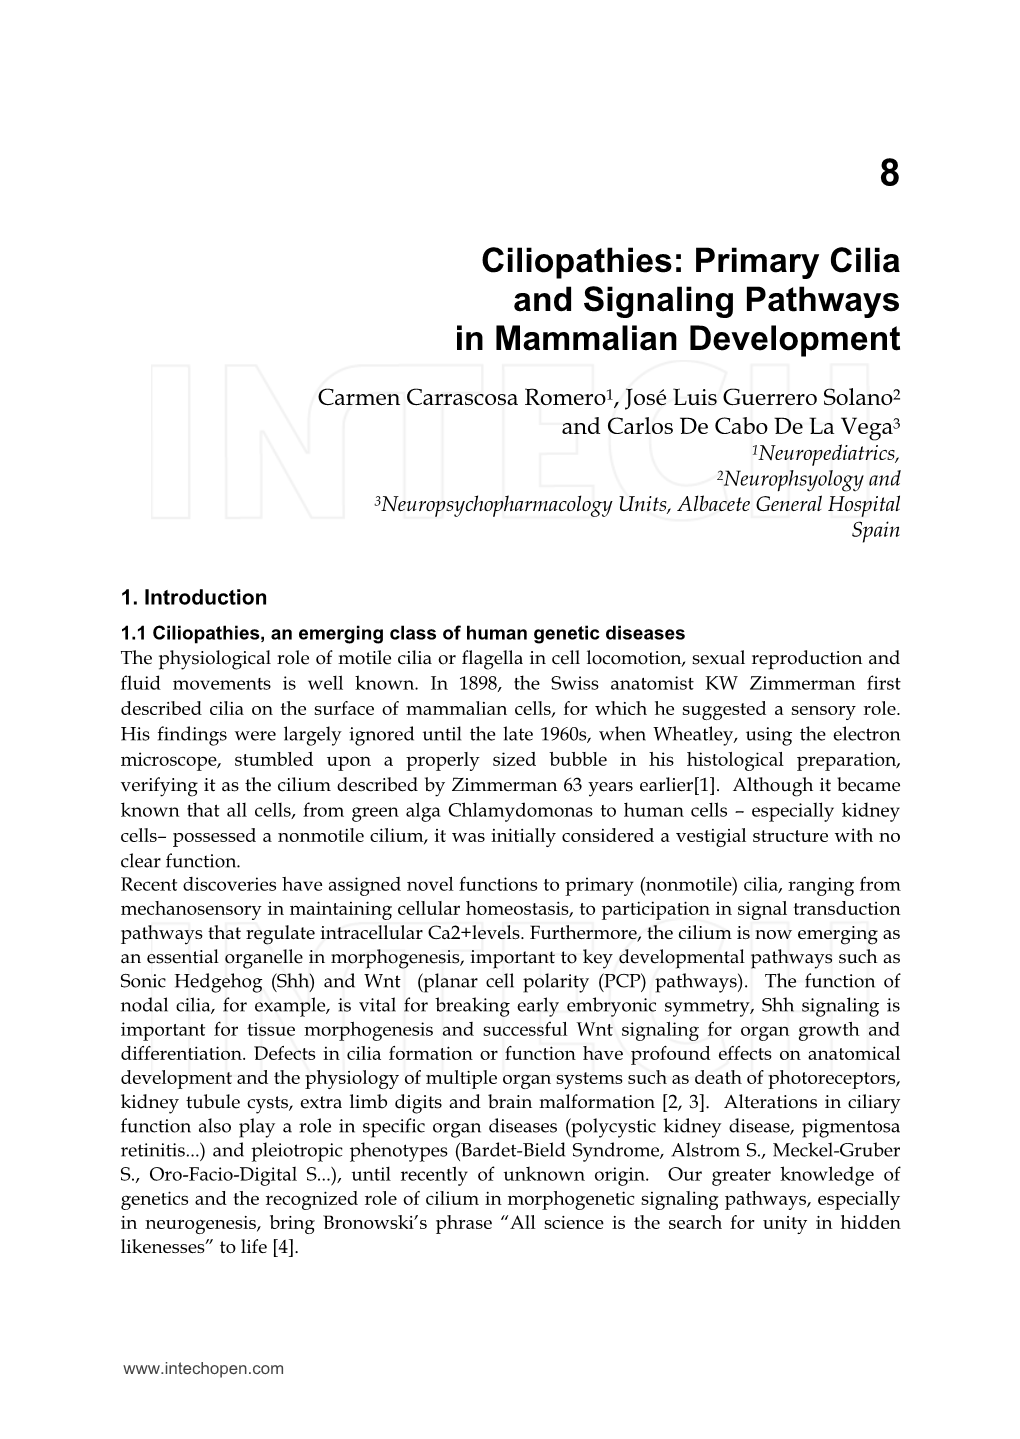 Ciliopathies: Primary Cilia and Signaling Pathways in Mammalian Development